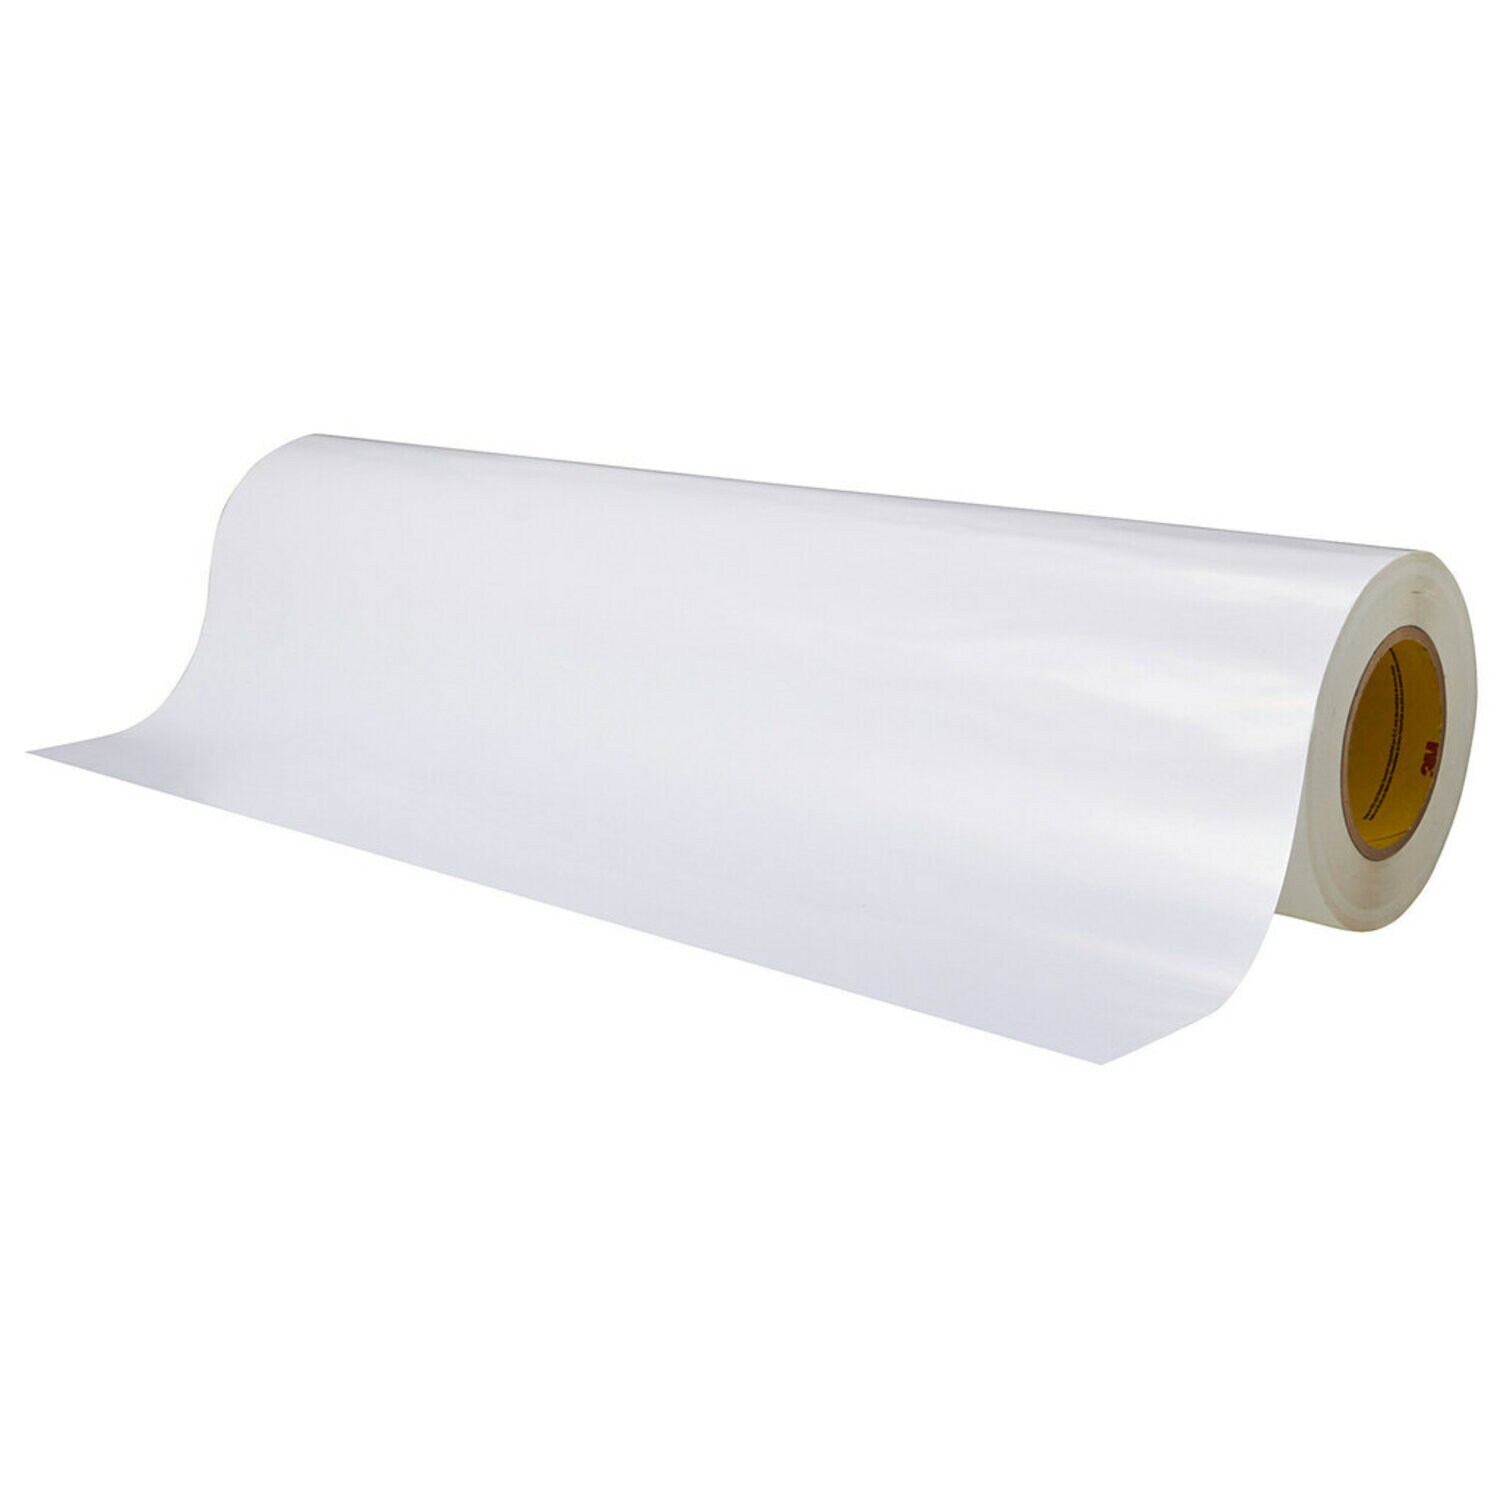 Silicone Sheet, Silicone Rubber Sheets, Silicone Rolls, Silicone Tape  Backing Adhesive 3m - China Silicone Sheet, Silicone Sheets